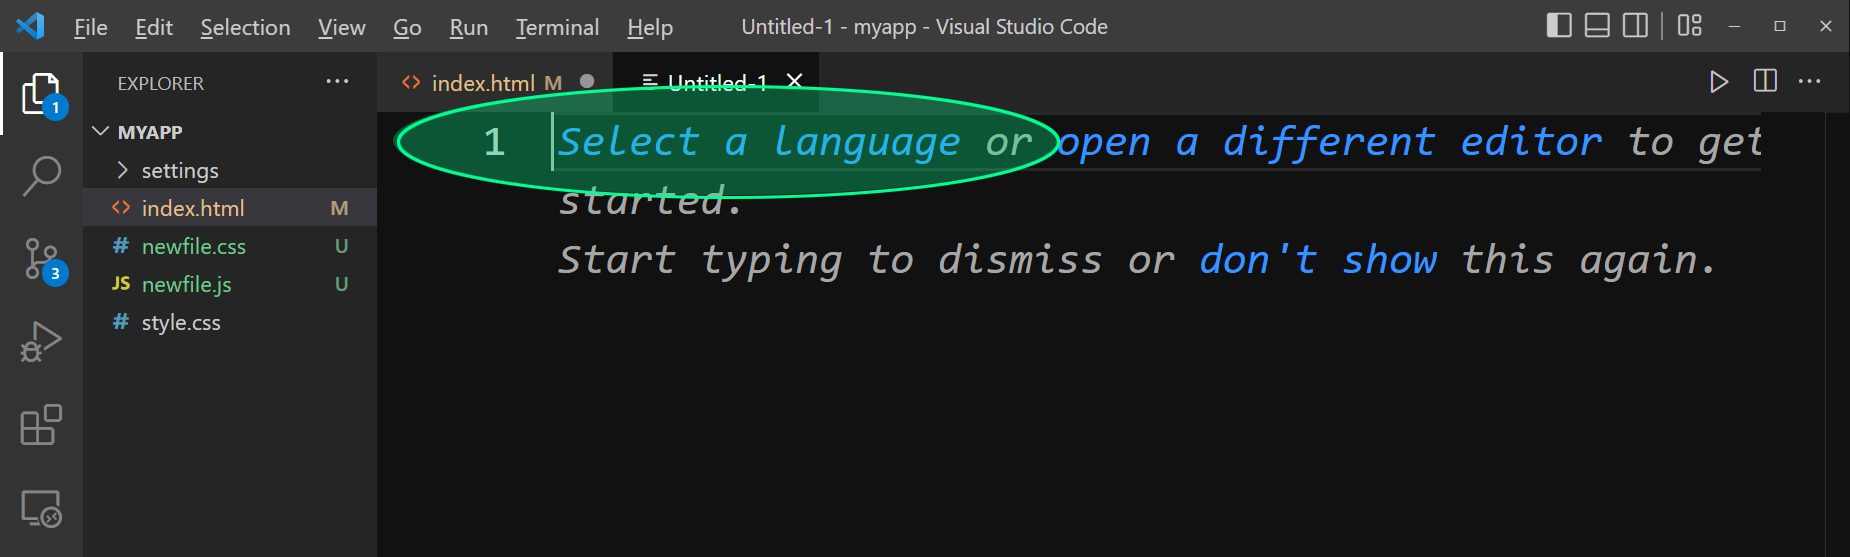 how to create a file and select language in vscode